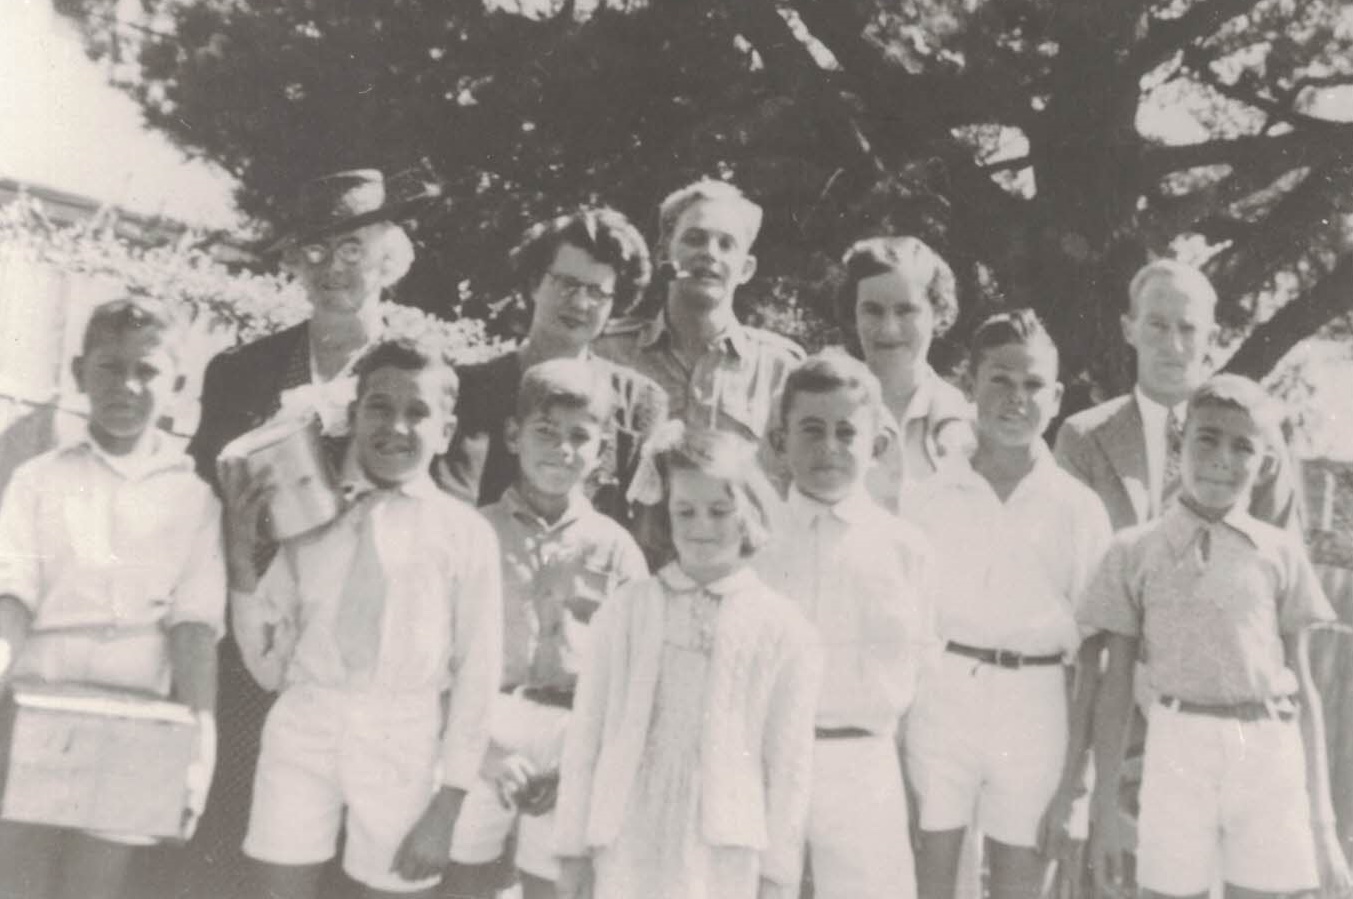 1945 – Easter Monday – St Francis House boys are ready for a picnic. Isabel Smith is standing fourth from the right.